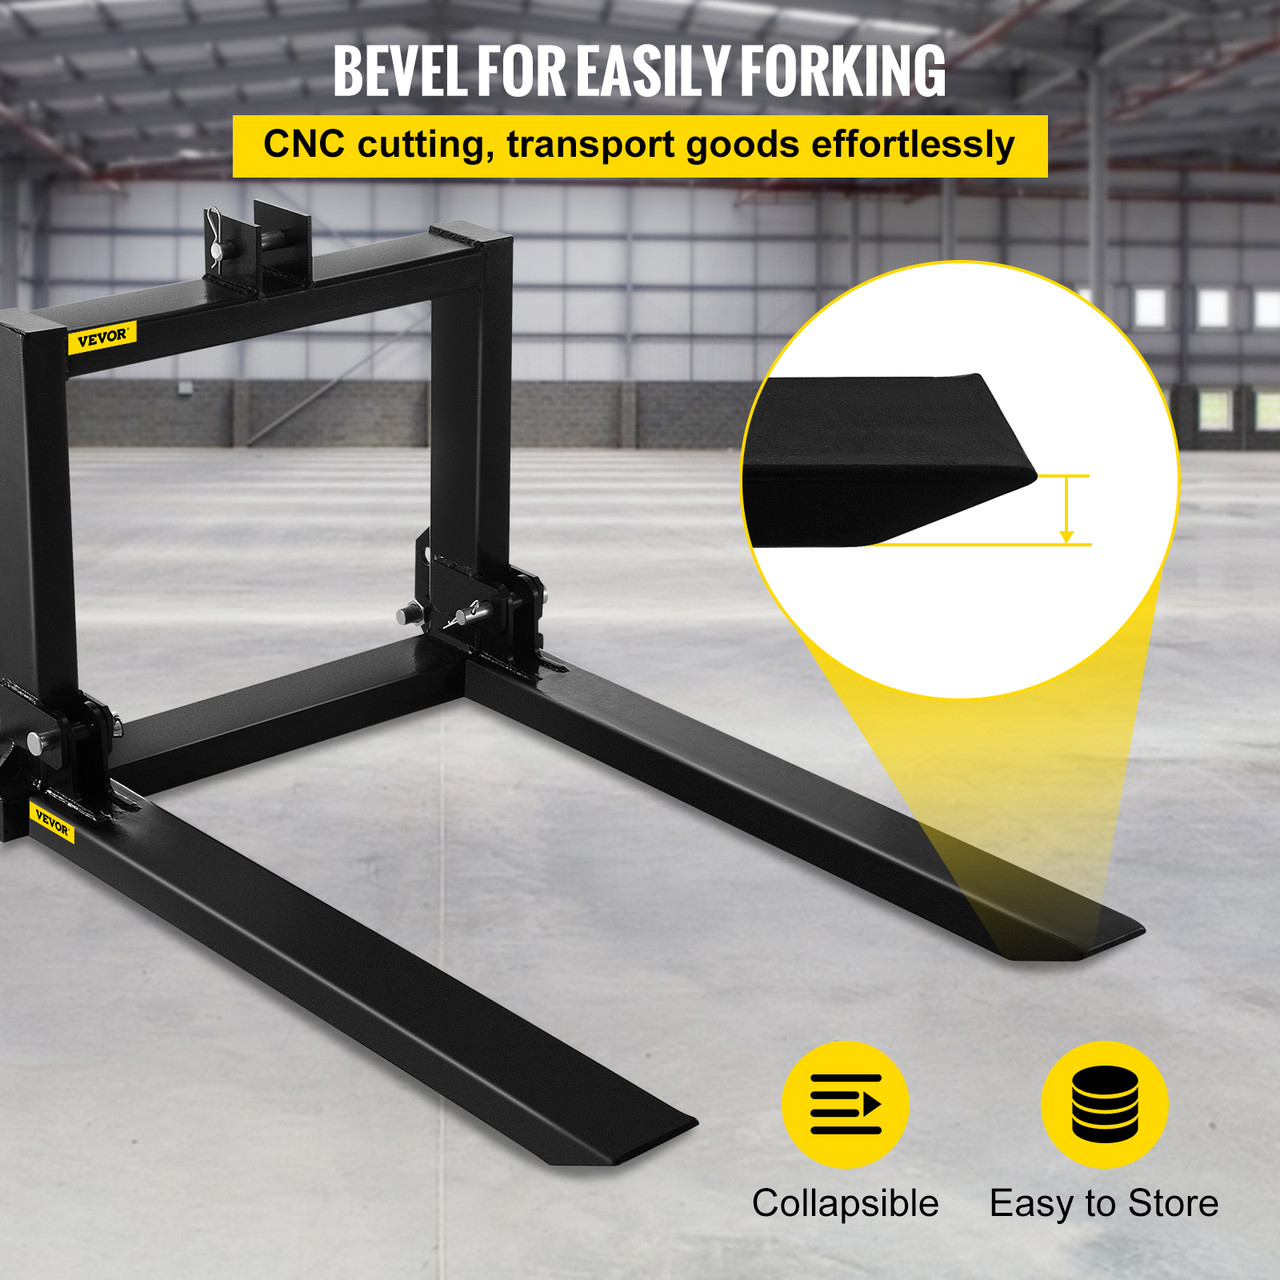 3 Point Hitch Pallet Fork 2000lbs, Fork Attachment for Category 1 Tractor, 25.5''x22''x41'', Steel Tractor Heavy Equipment Attachment, for Tractor, Skid Steer Loader